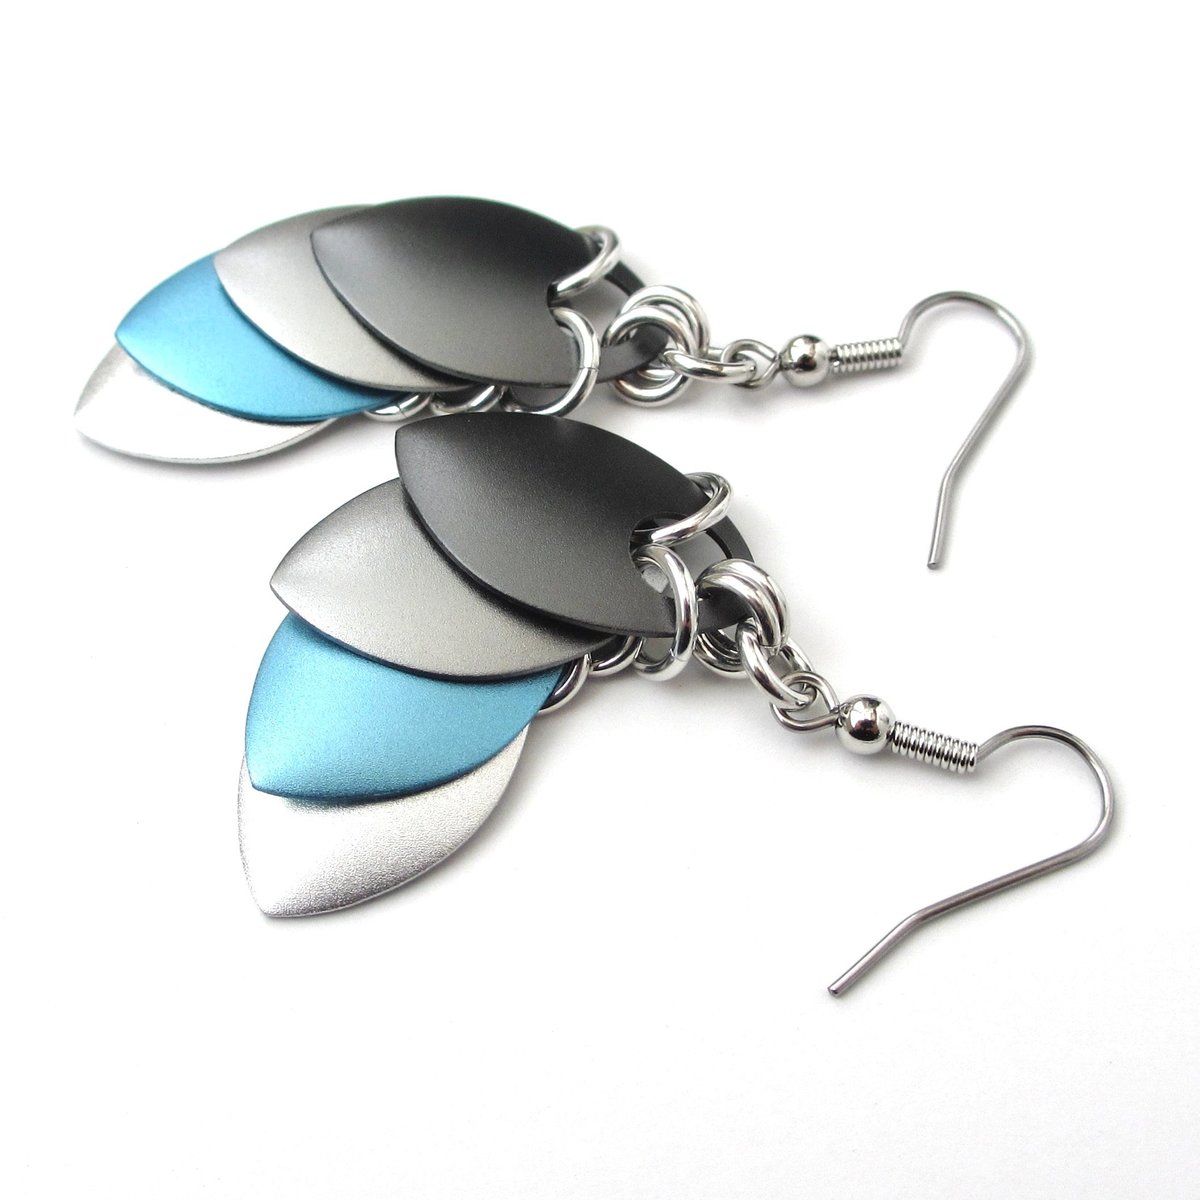 Demiboy pride earrings, anodized aluminum chainmail scales jewelry - gray, light blue, white